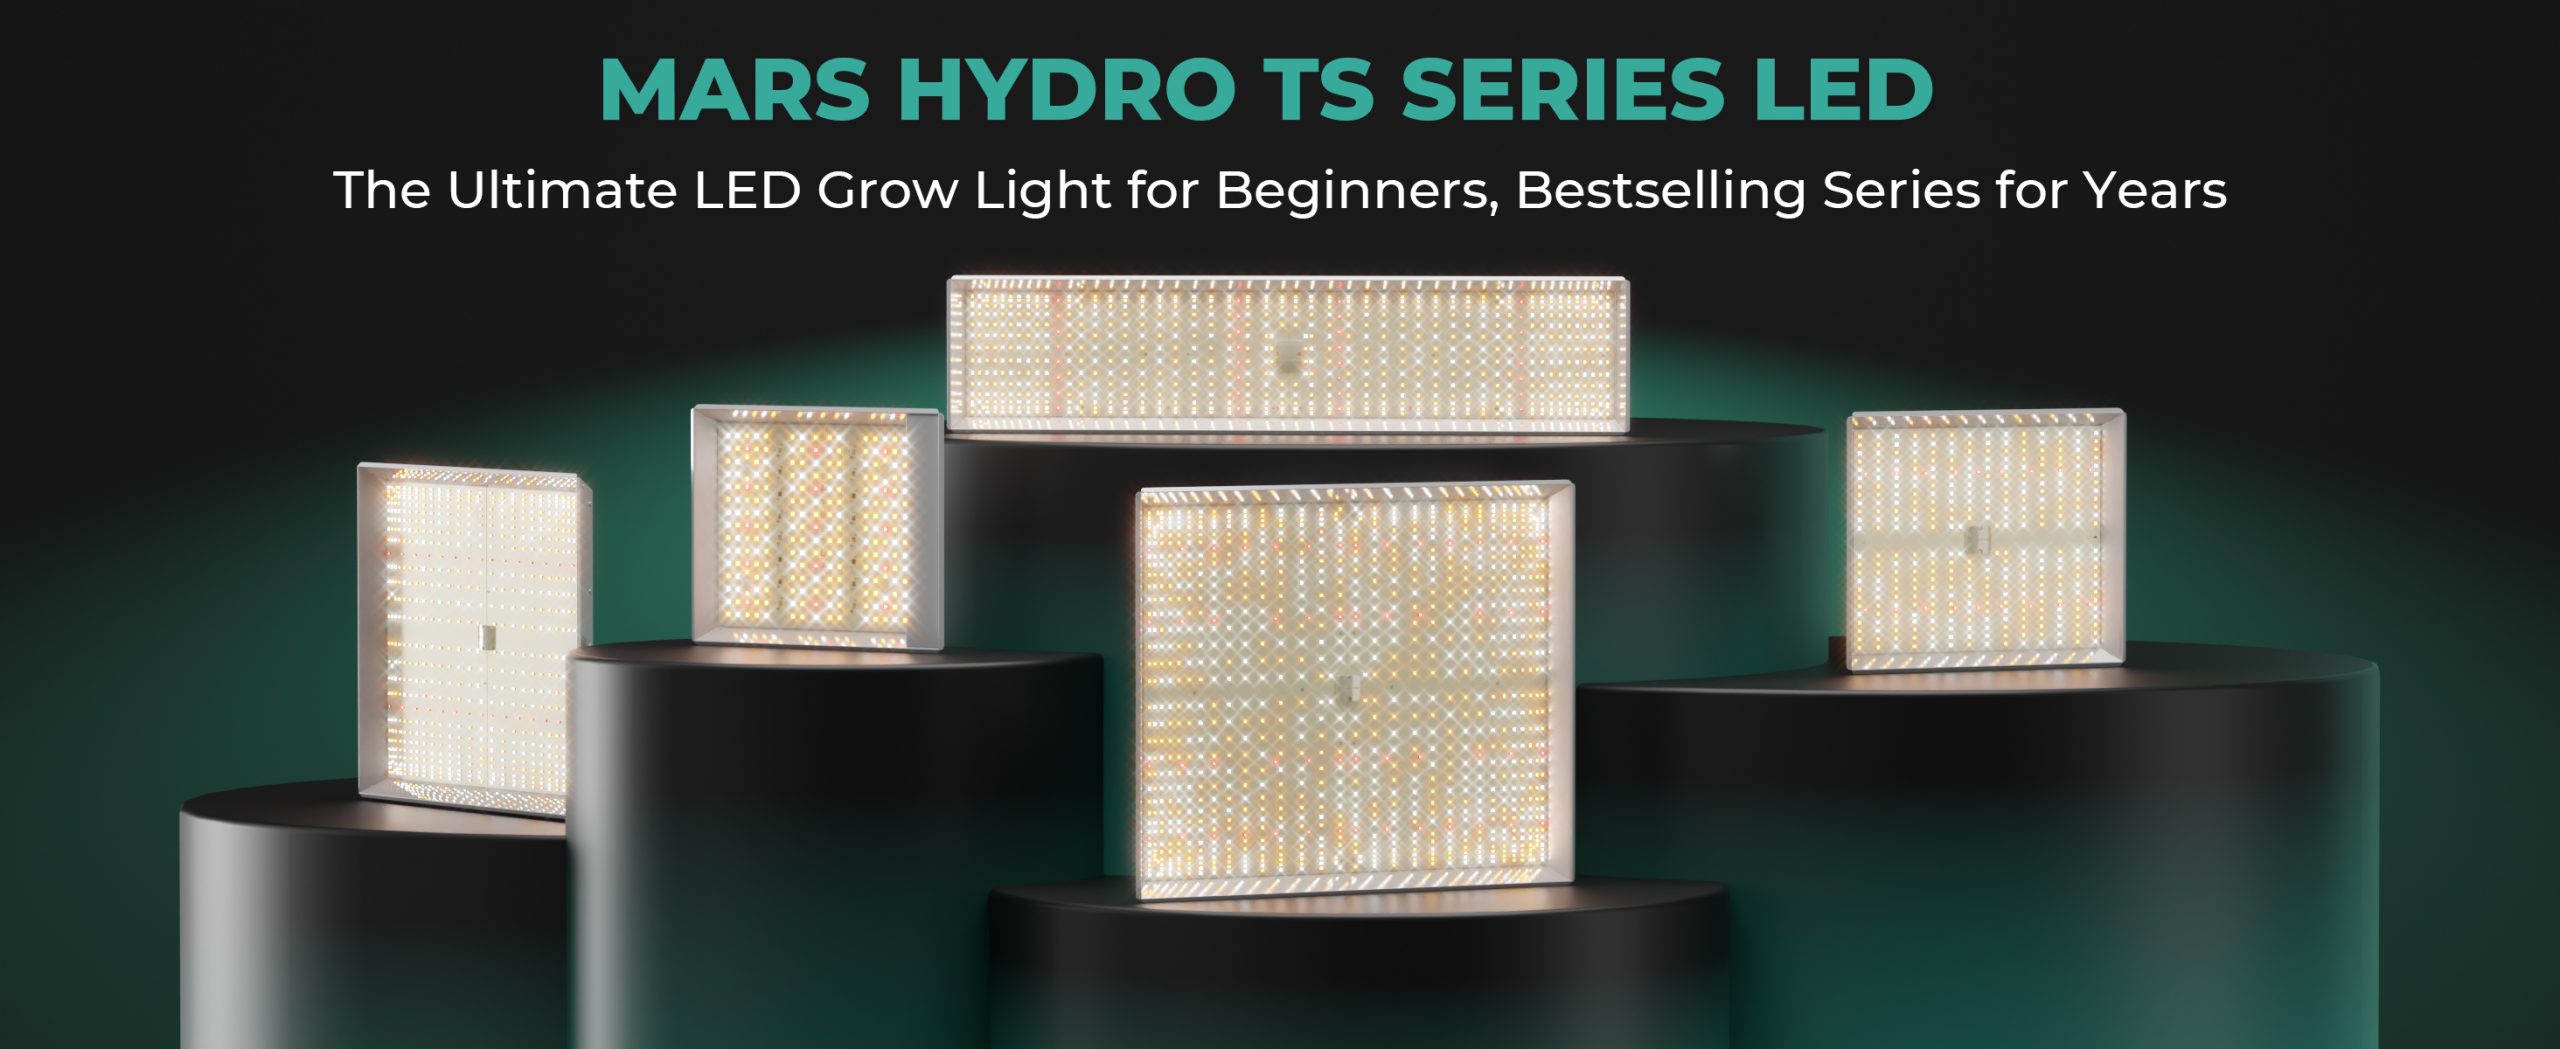 MARS-HYDRO-TS-SERIES-LED-The-Ultimate-LED-Grow-Light-for-Beginners-Bestselling-Series-for-Years-1-scaled.jpg